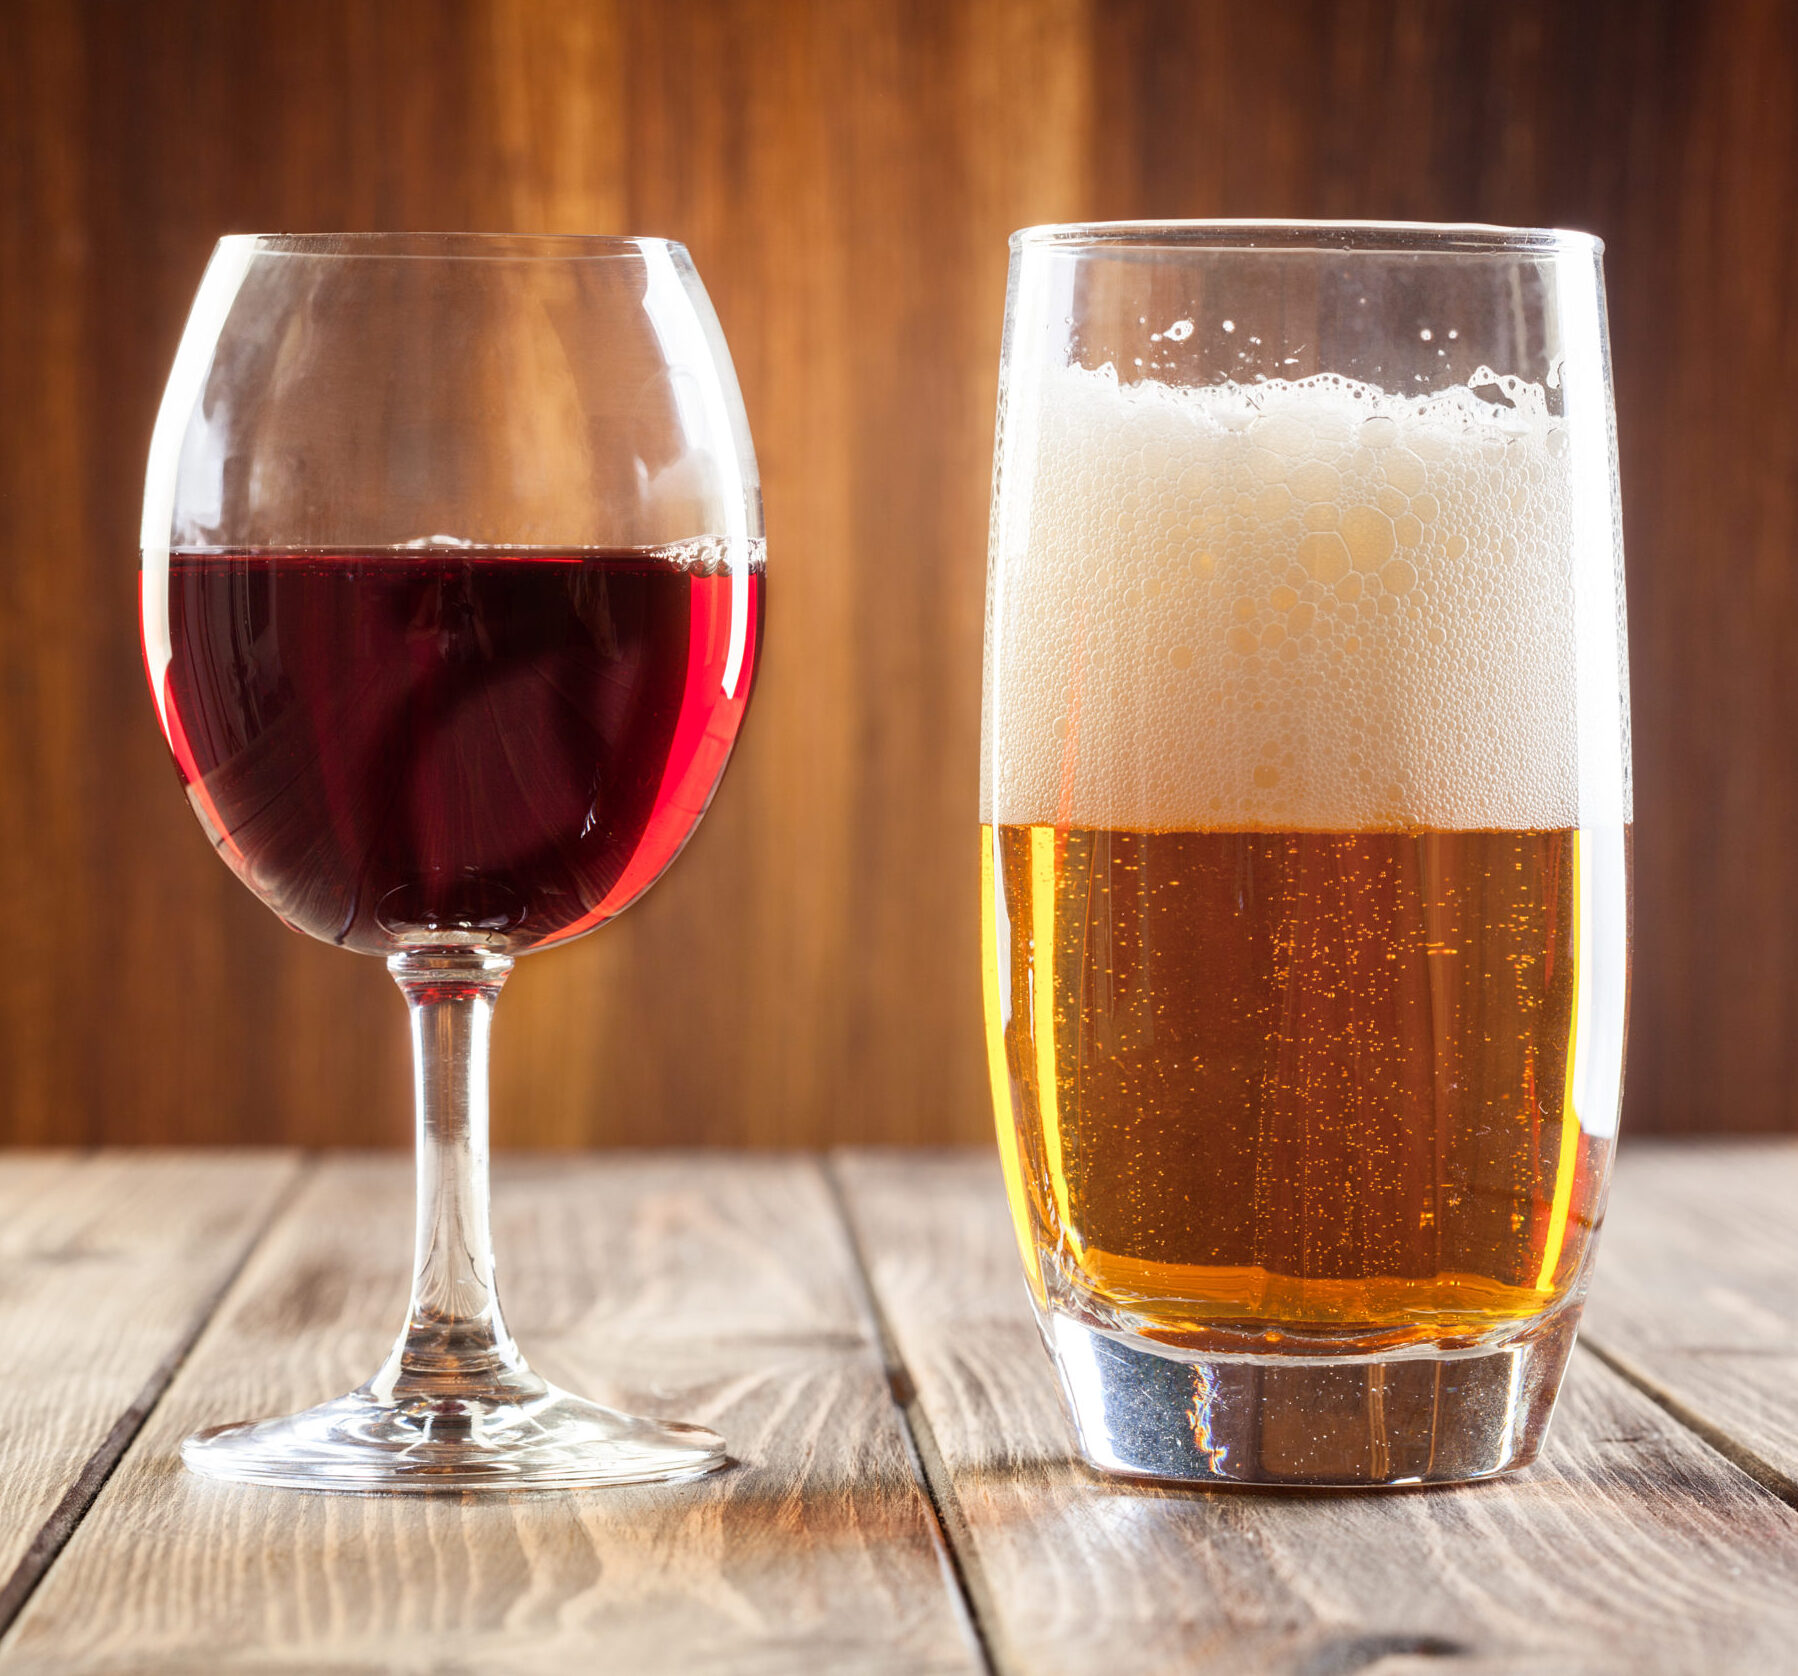 Red wine glass and glass of light beer